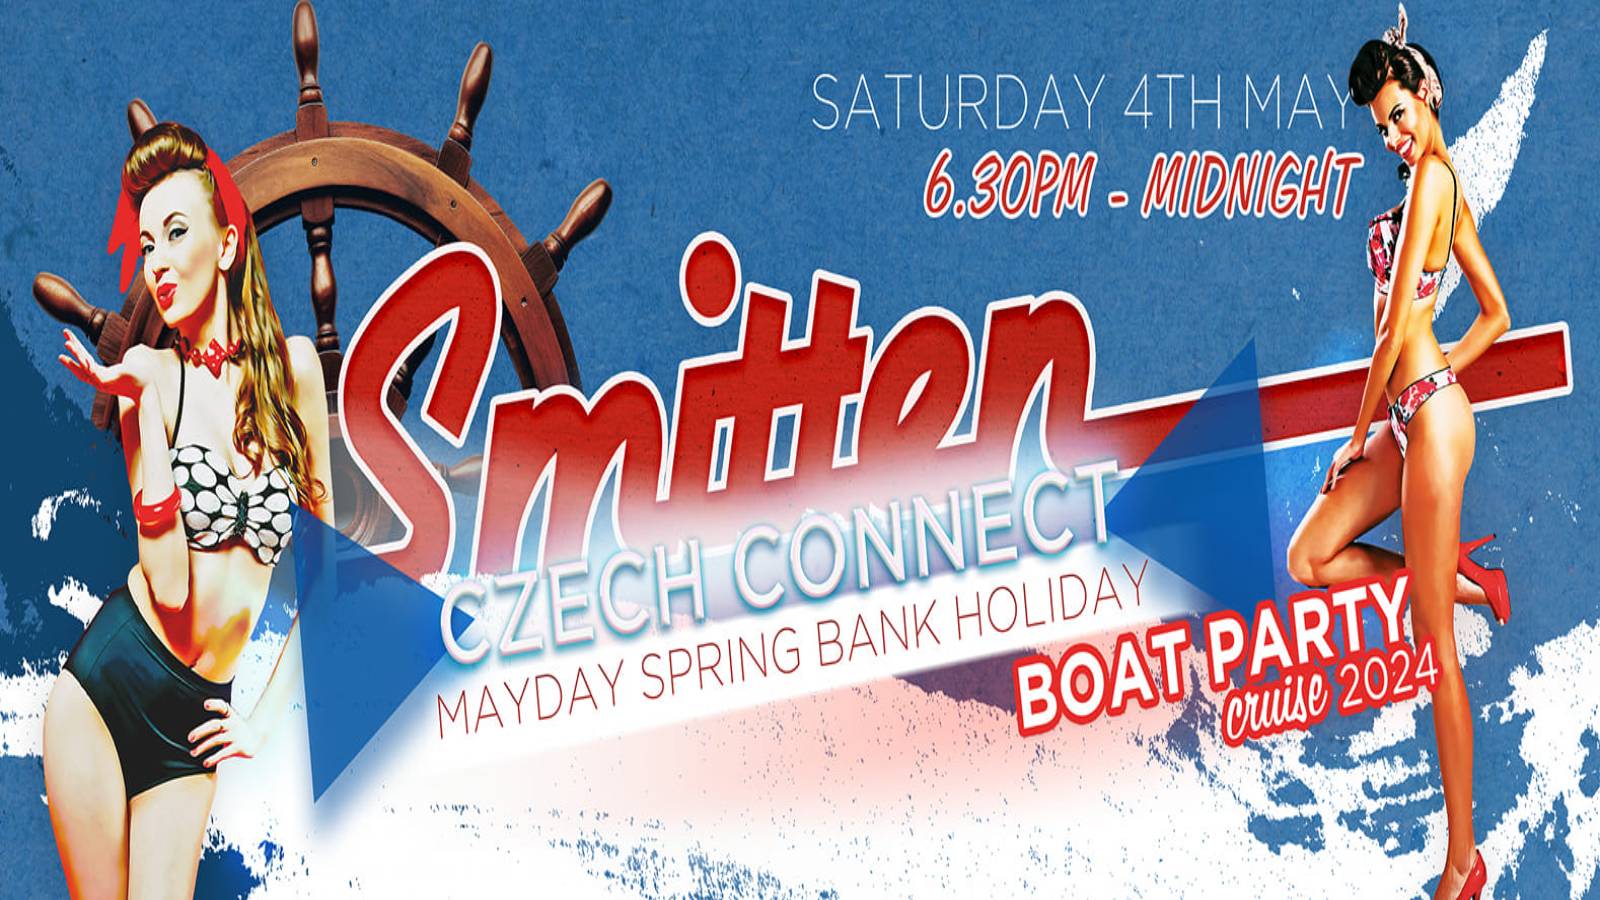 Smitten Czech Connect boat party for the May 4th Bank Holiday in 2024